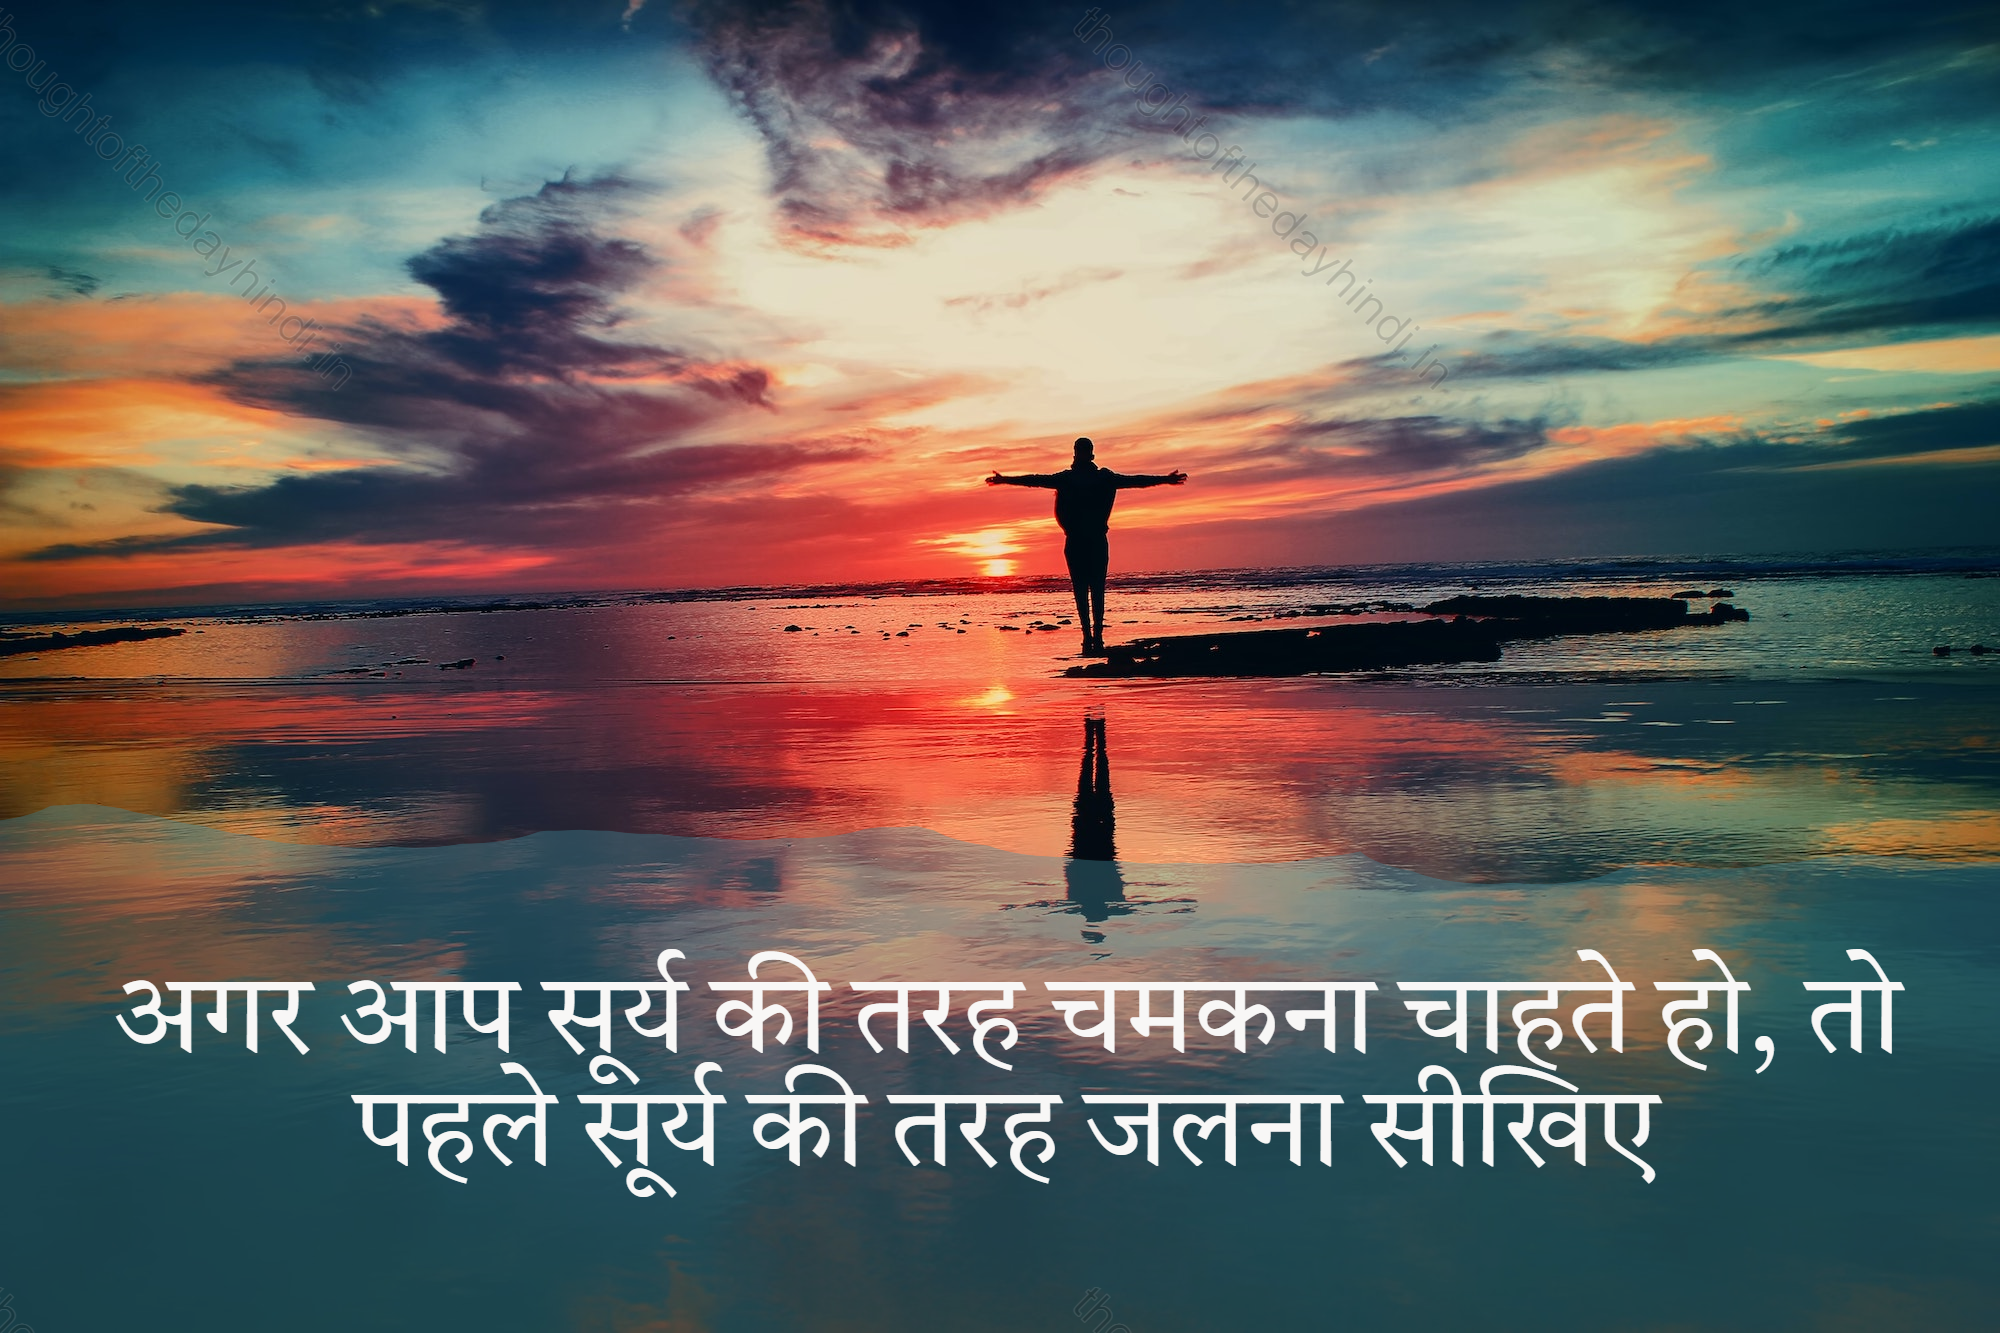 Motivational Thought of the Day in Hindi